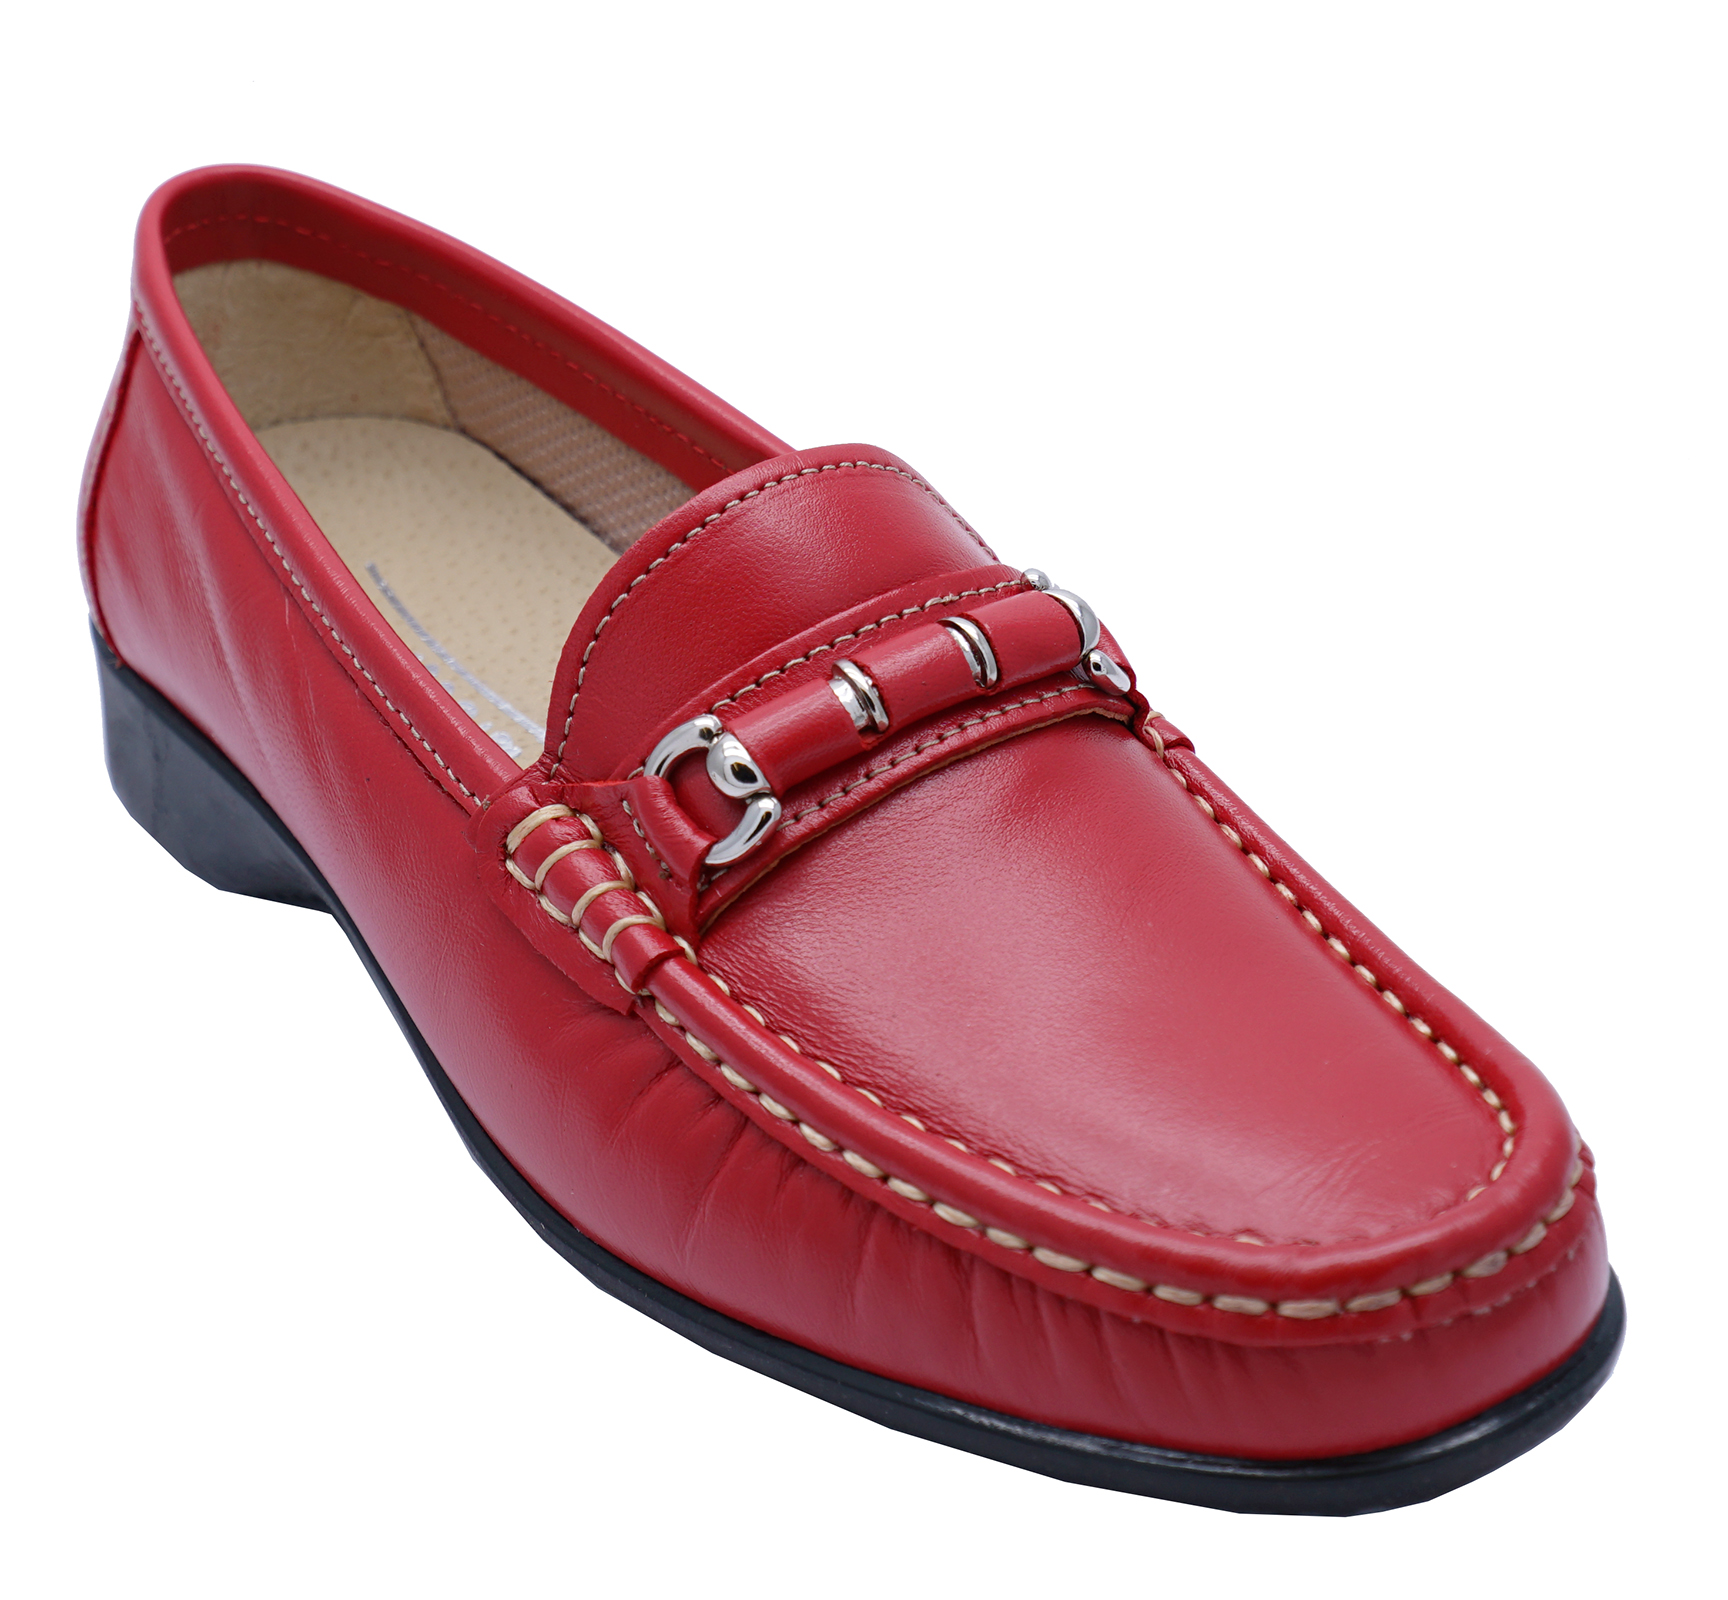 Slip on loafers womens